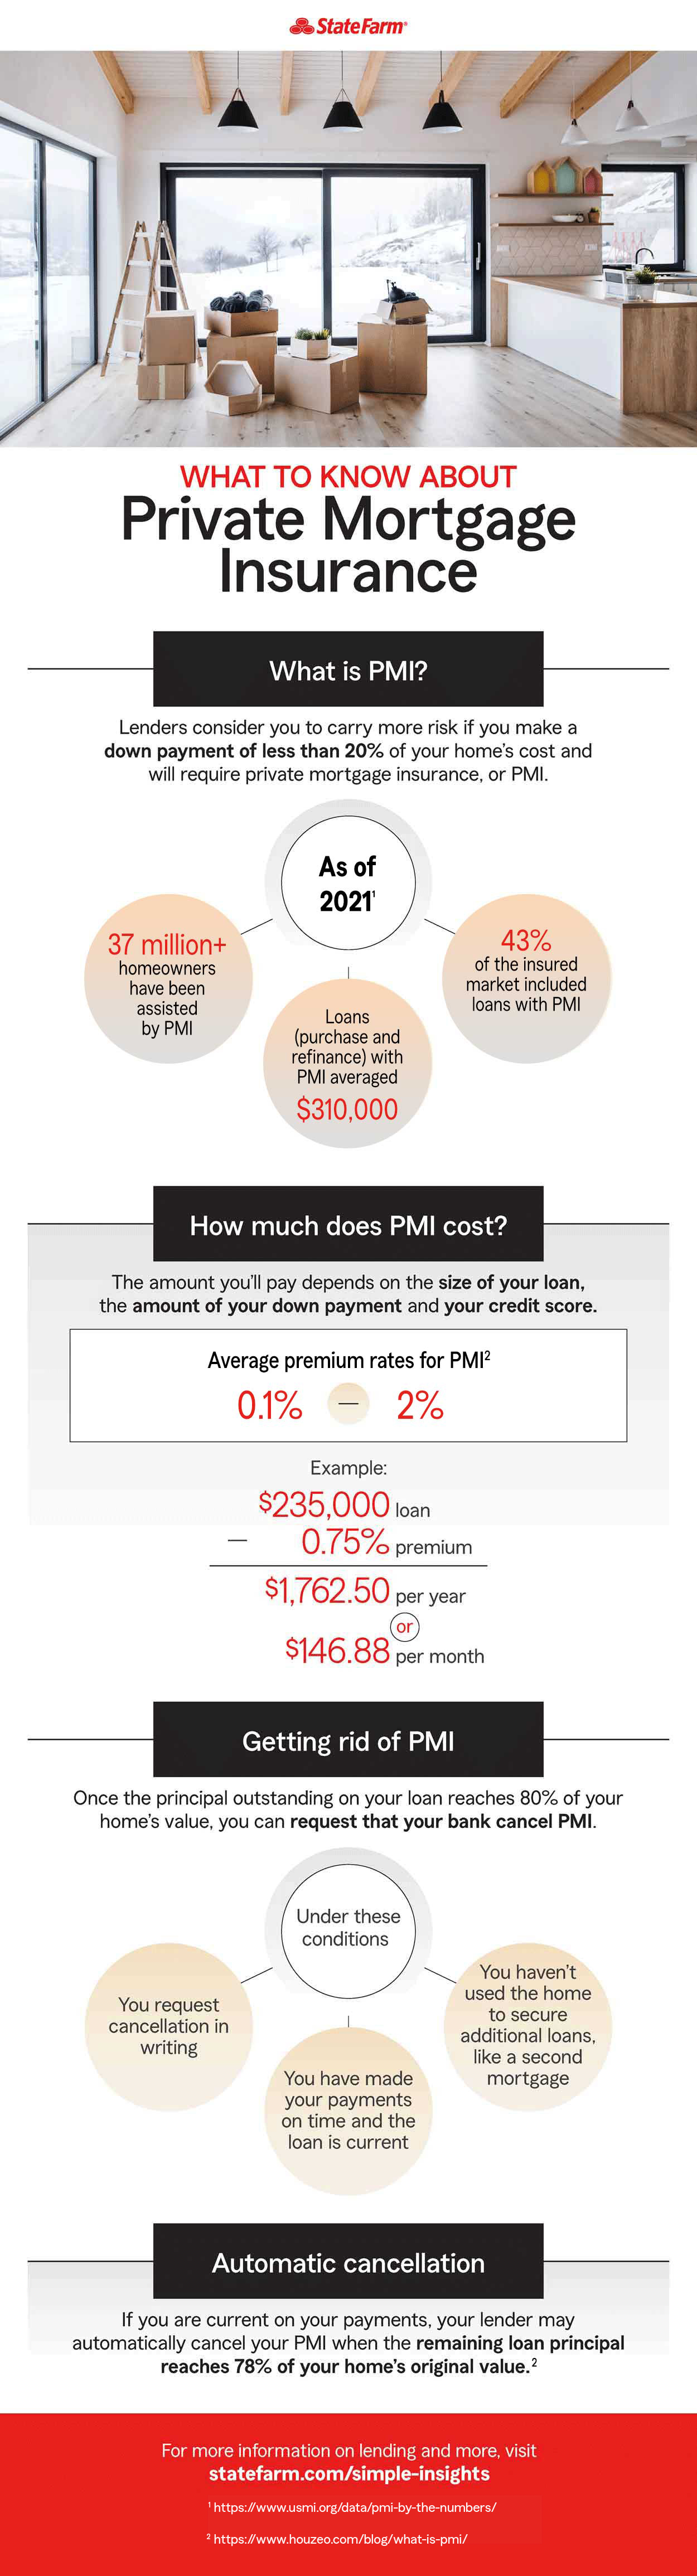 private-mortgage-insurance-infographic